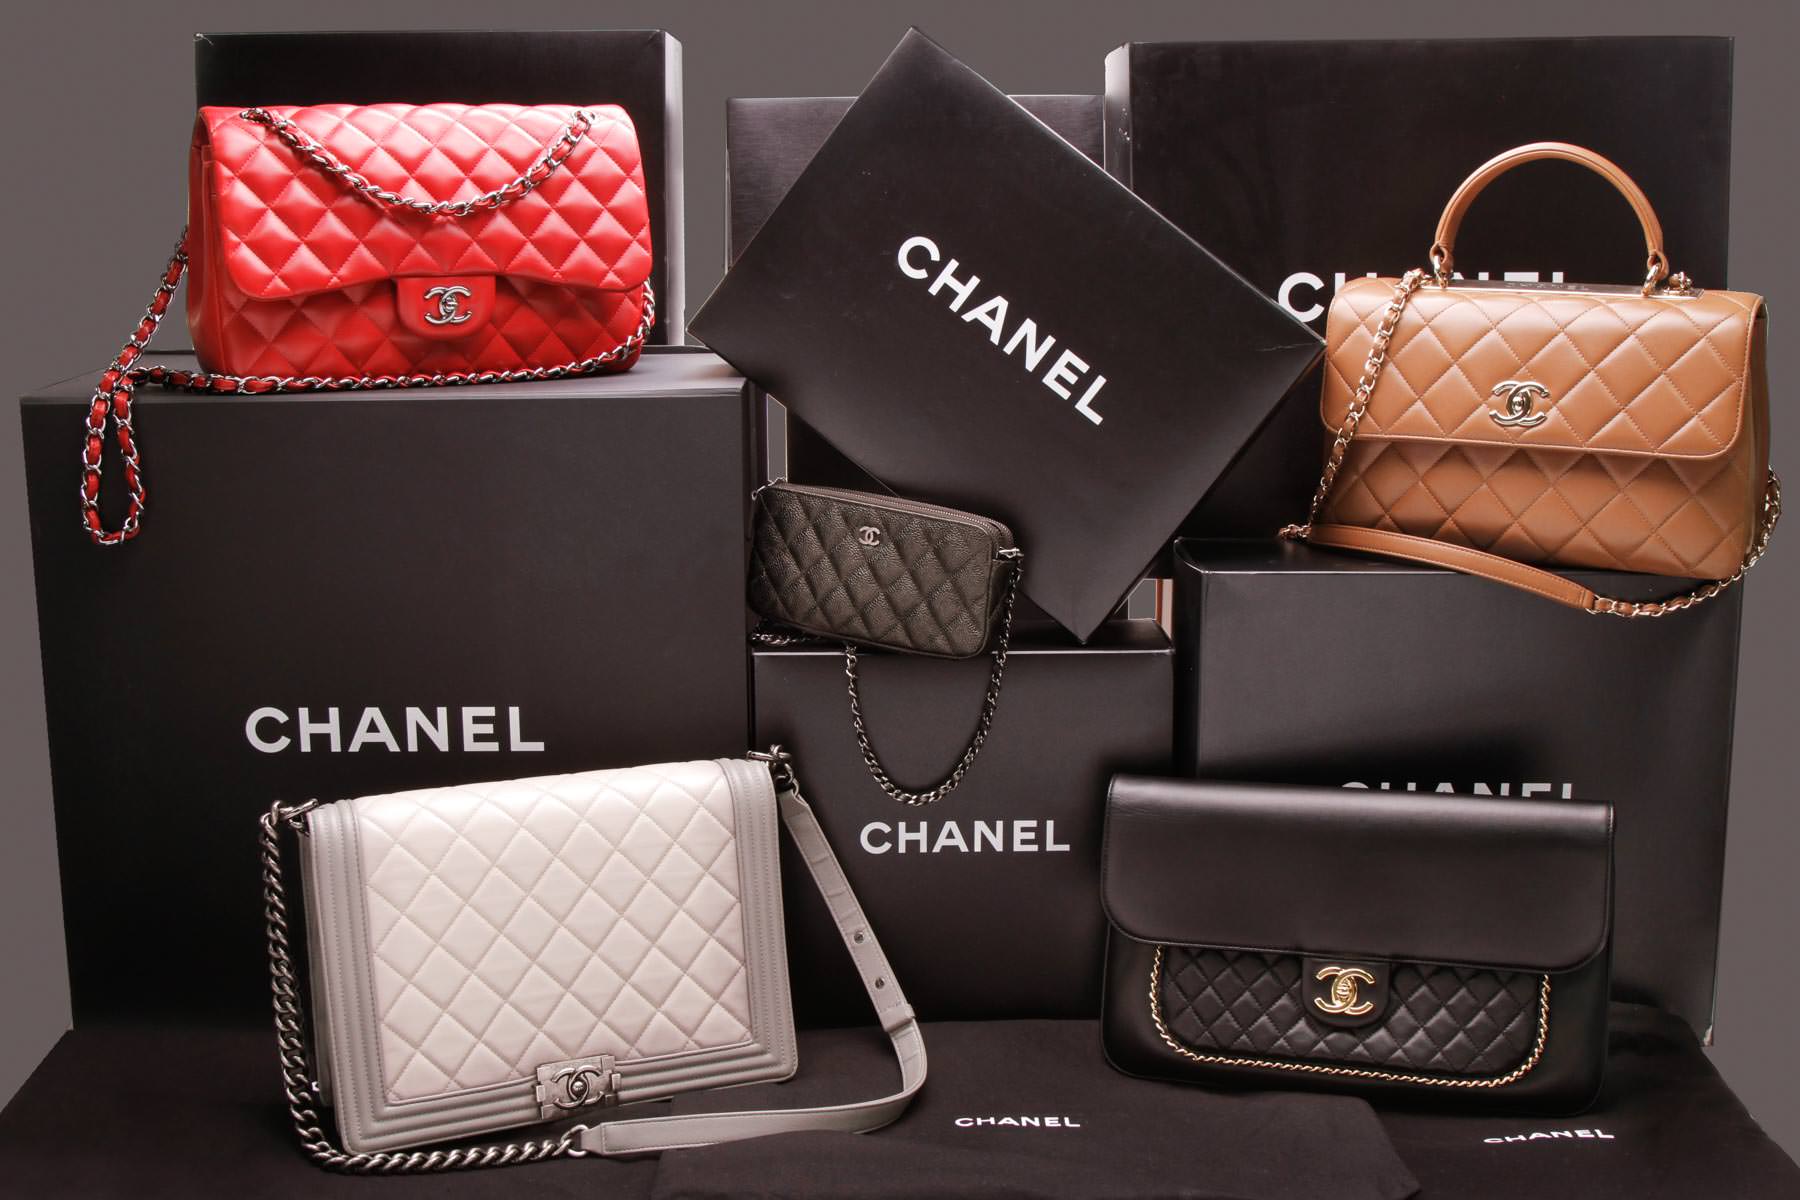 Why Chanel Prices are Befitting of the Bag